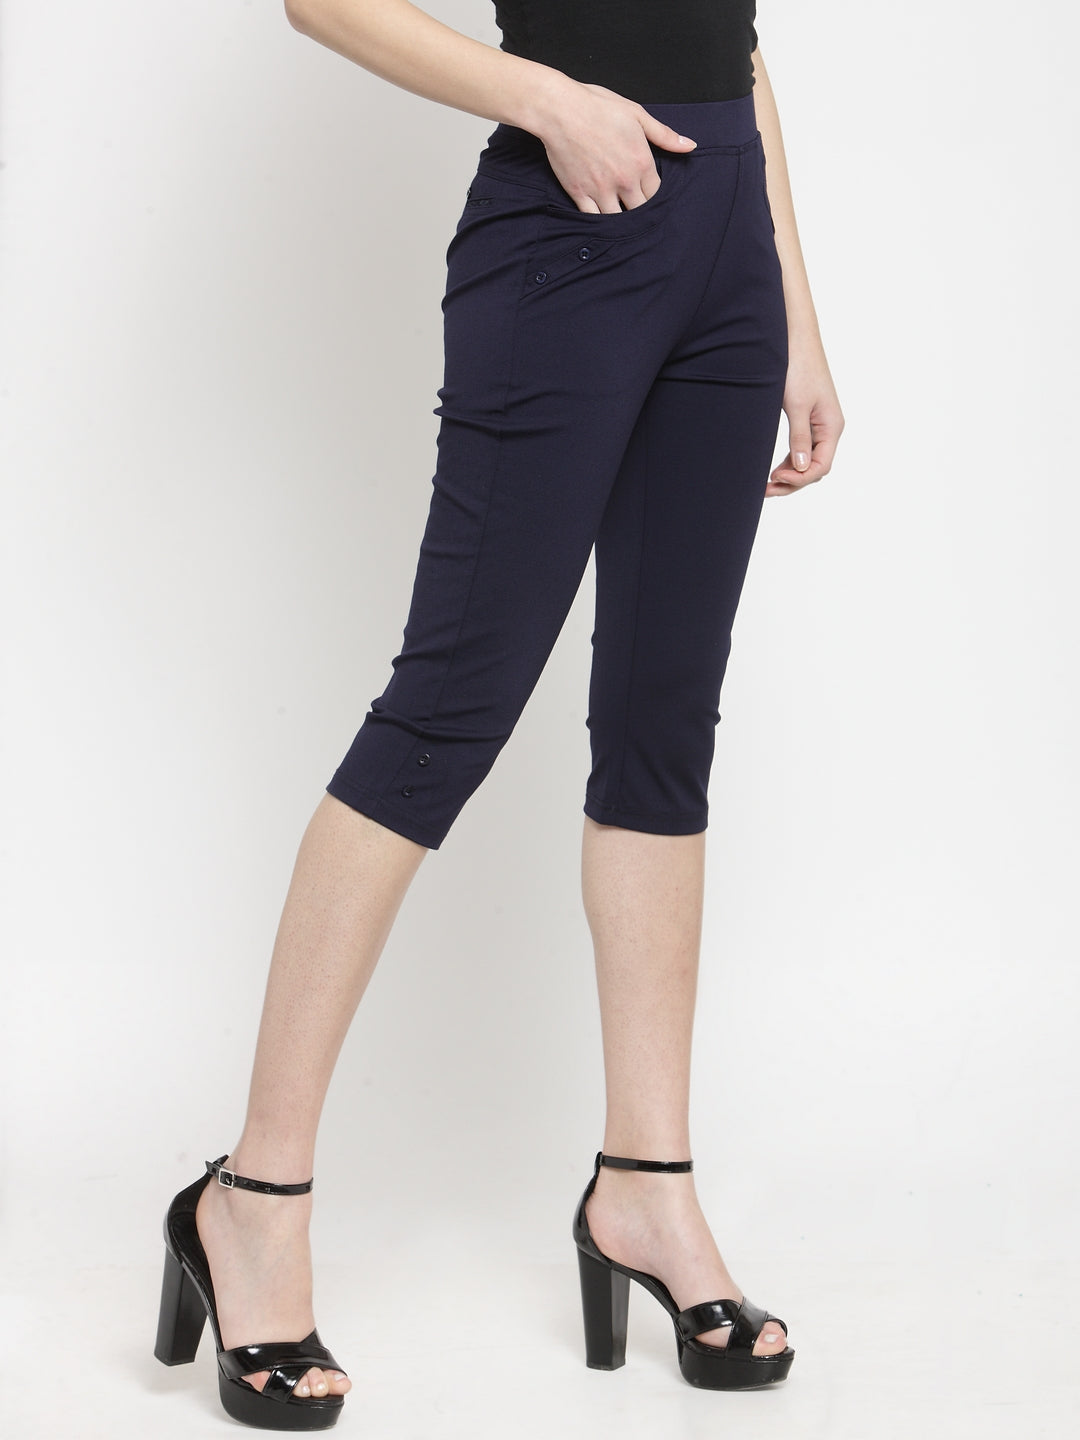 Women Skinny Fitted Navy Blue Solid Capri